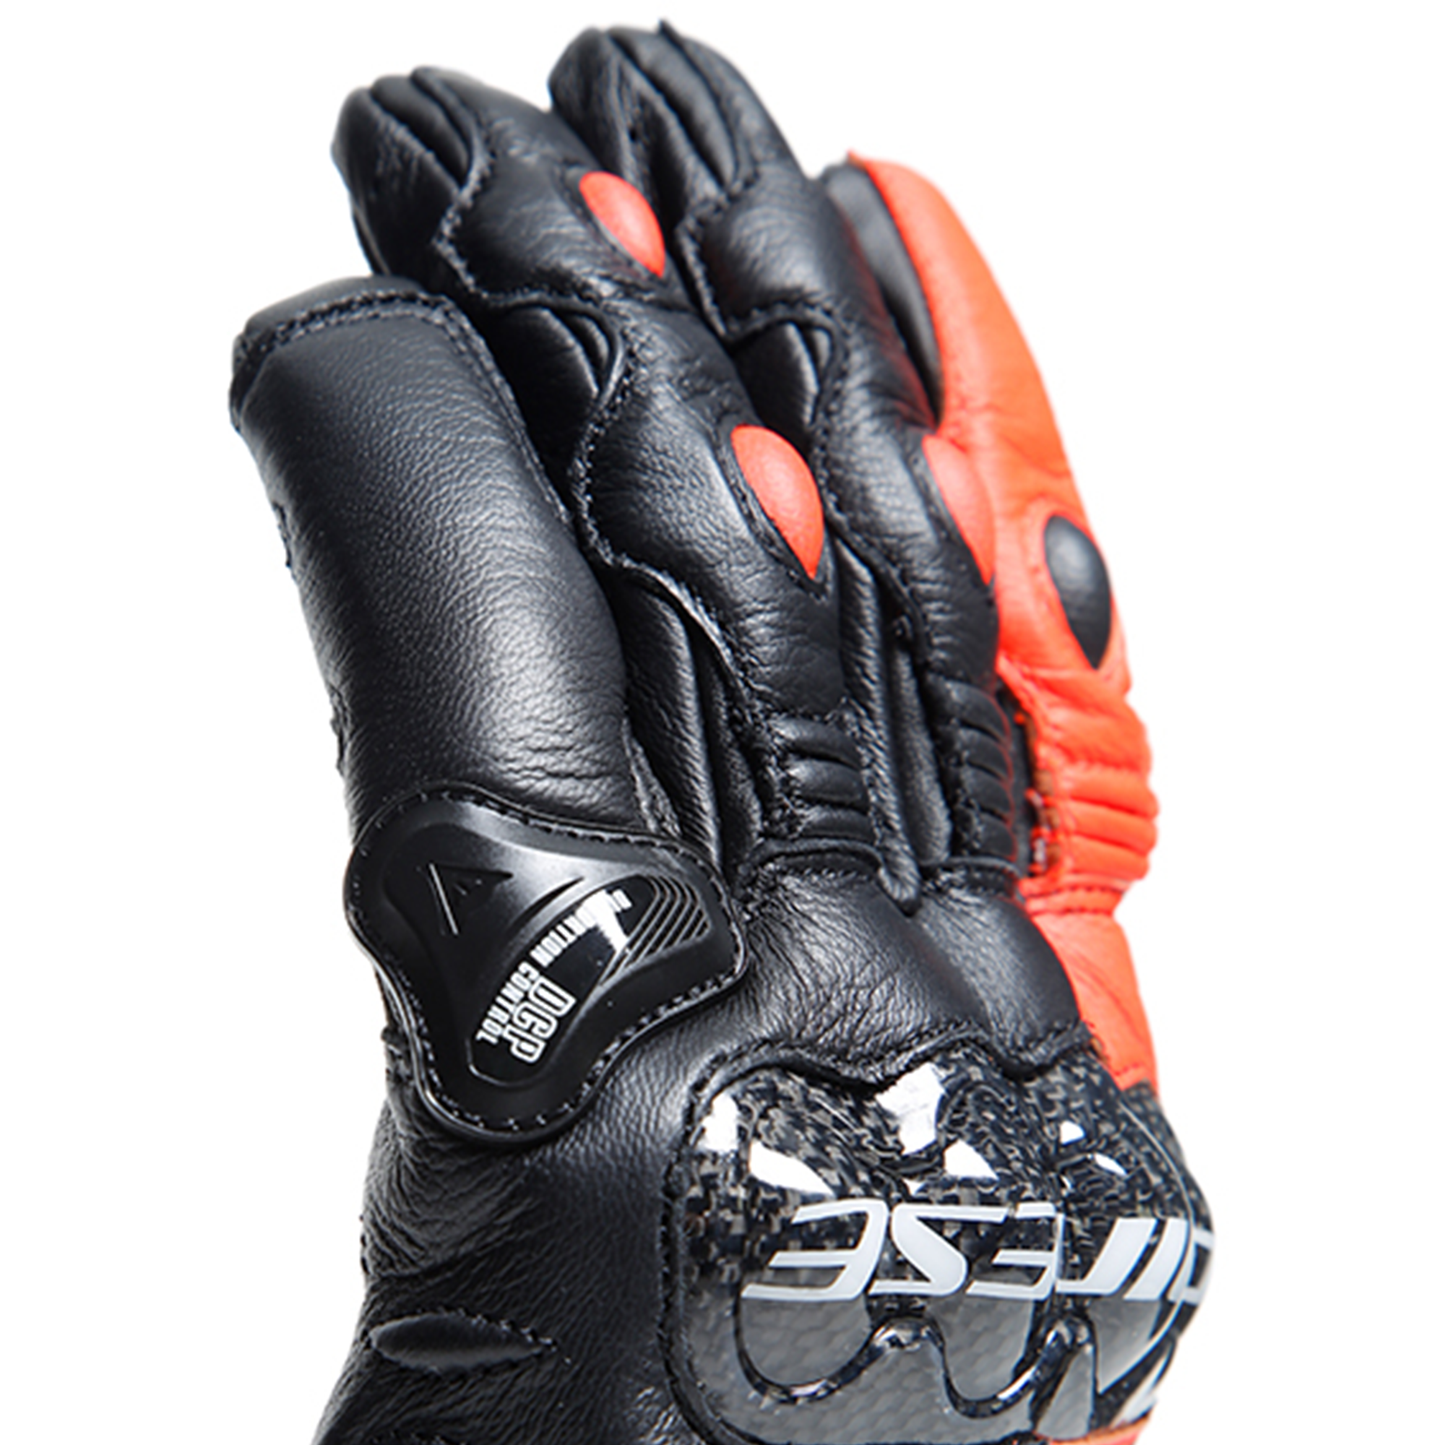 Dainese Carbon 4 Short Leather Gloves - Black/Flo Red